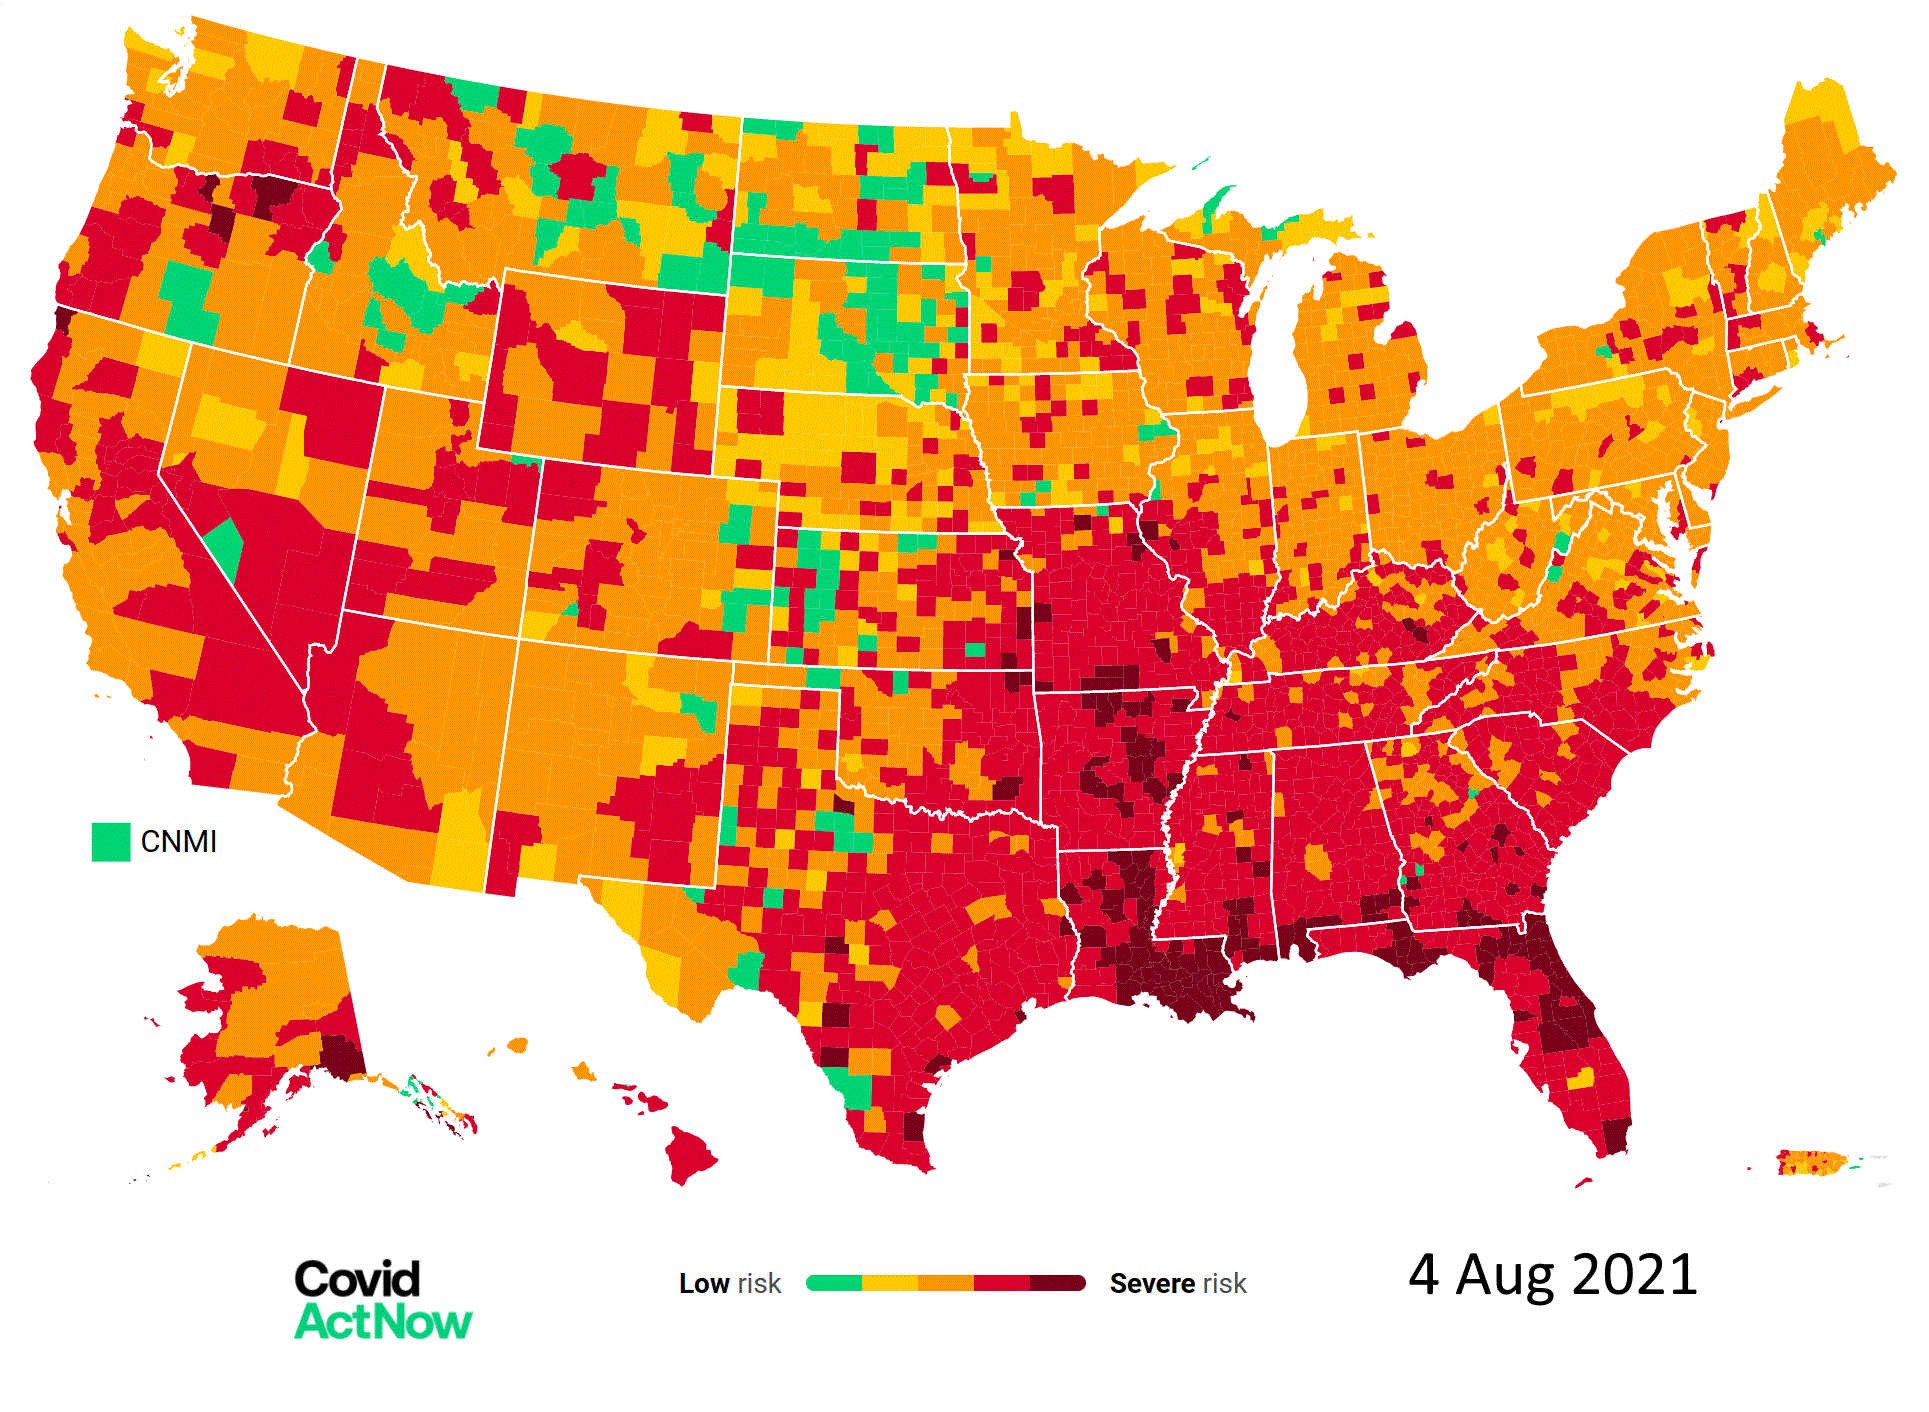 Map of the U.S. showing the Covid risk levels and vaccination percentages per county, 4 August 2021. The counties with the lowest vaccination rates have the highest infection rates. The highest Covid risk levels are in Louisiana and Florida. Graphic: Covid Act Now